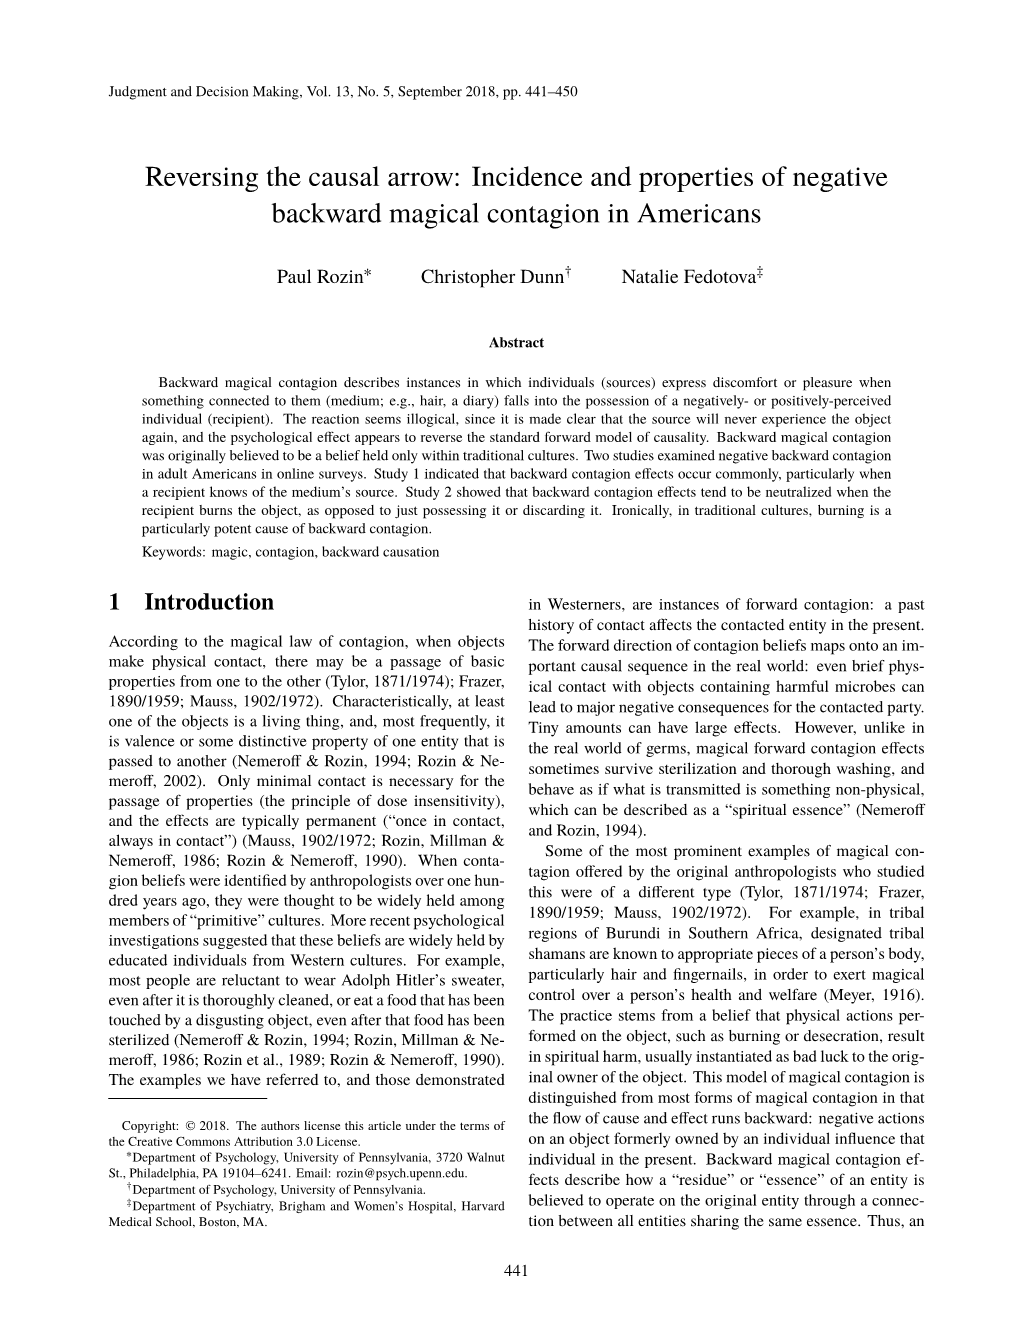 Incidence and Properties of Negative Backward Magical Contagion in Americans